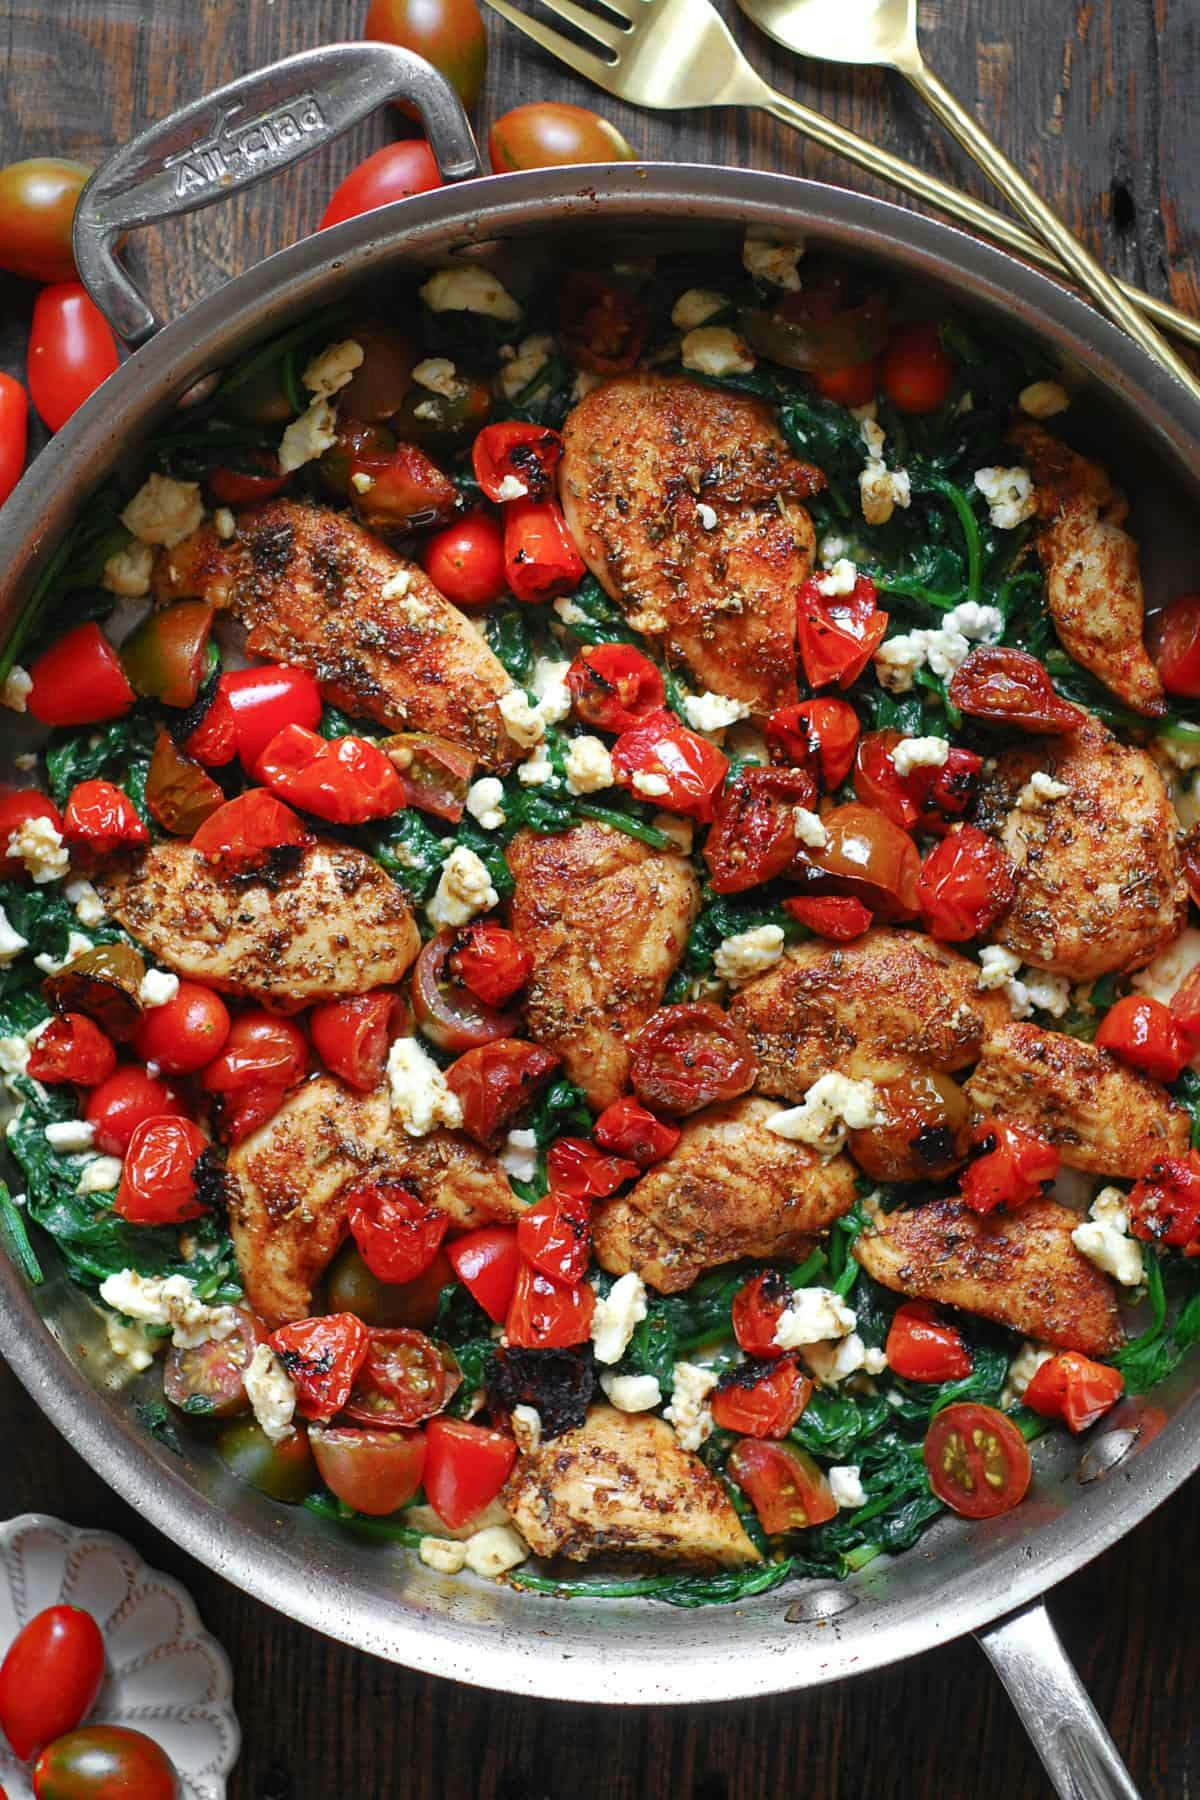 Mediterranean Chicken Stir Fry with Spinach, Tomatoes, and Feta Cheese